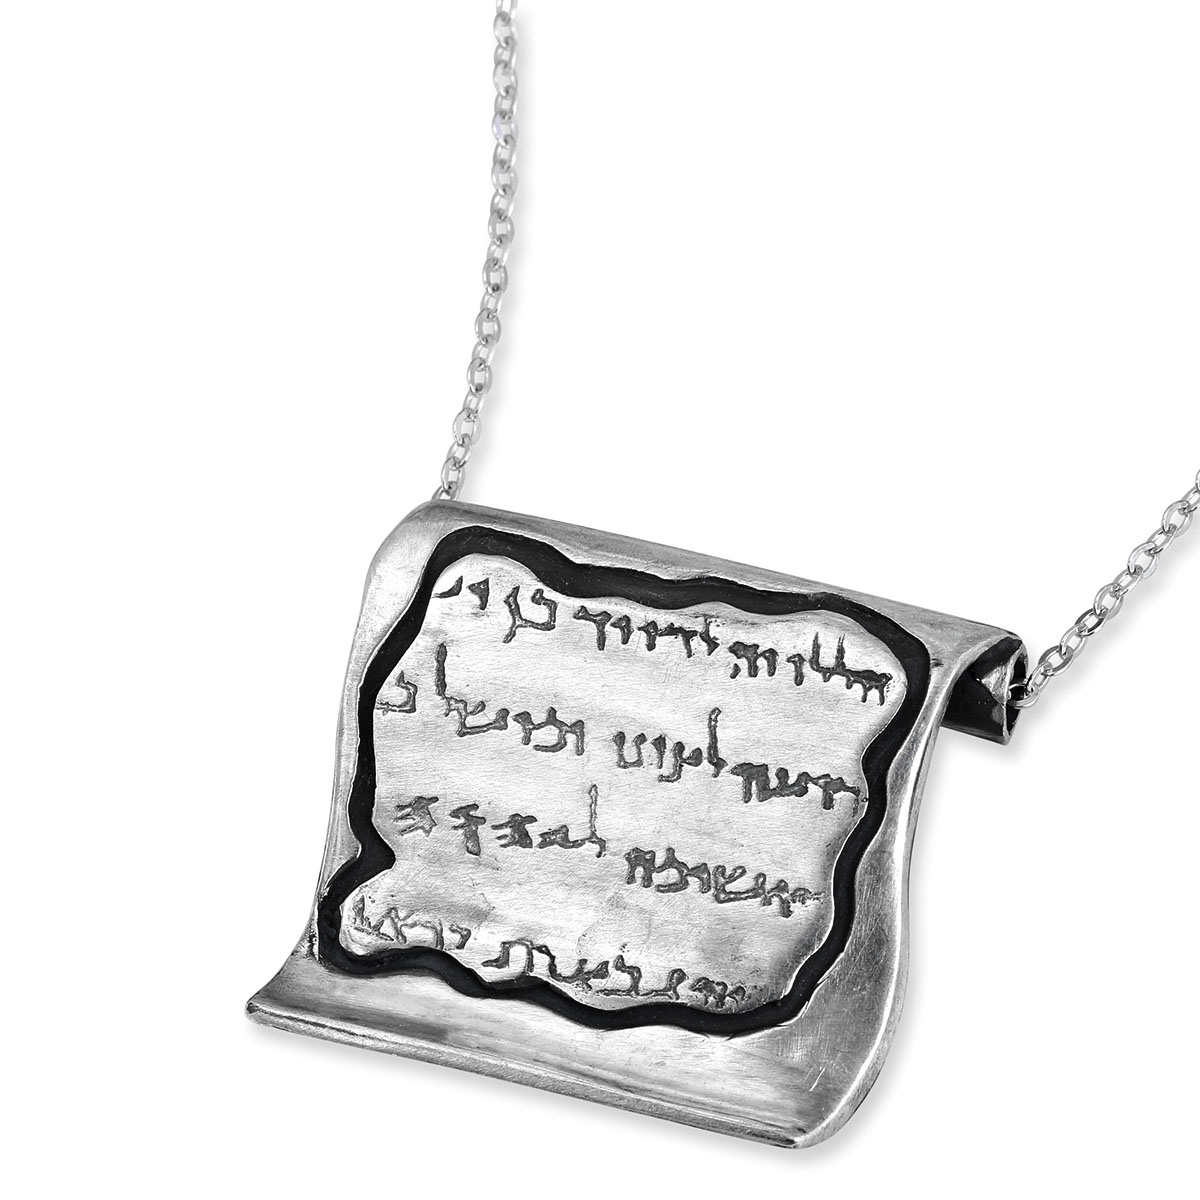 Sterling Silver Pendant - Psalms Scroll from Qumran. Adaptation - 1